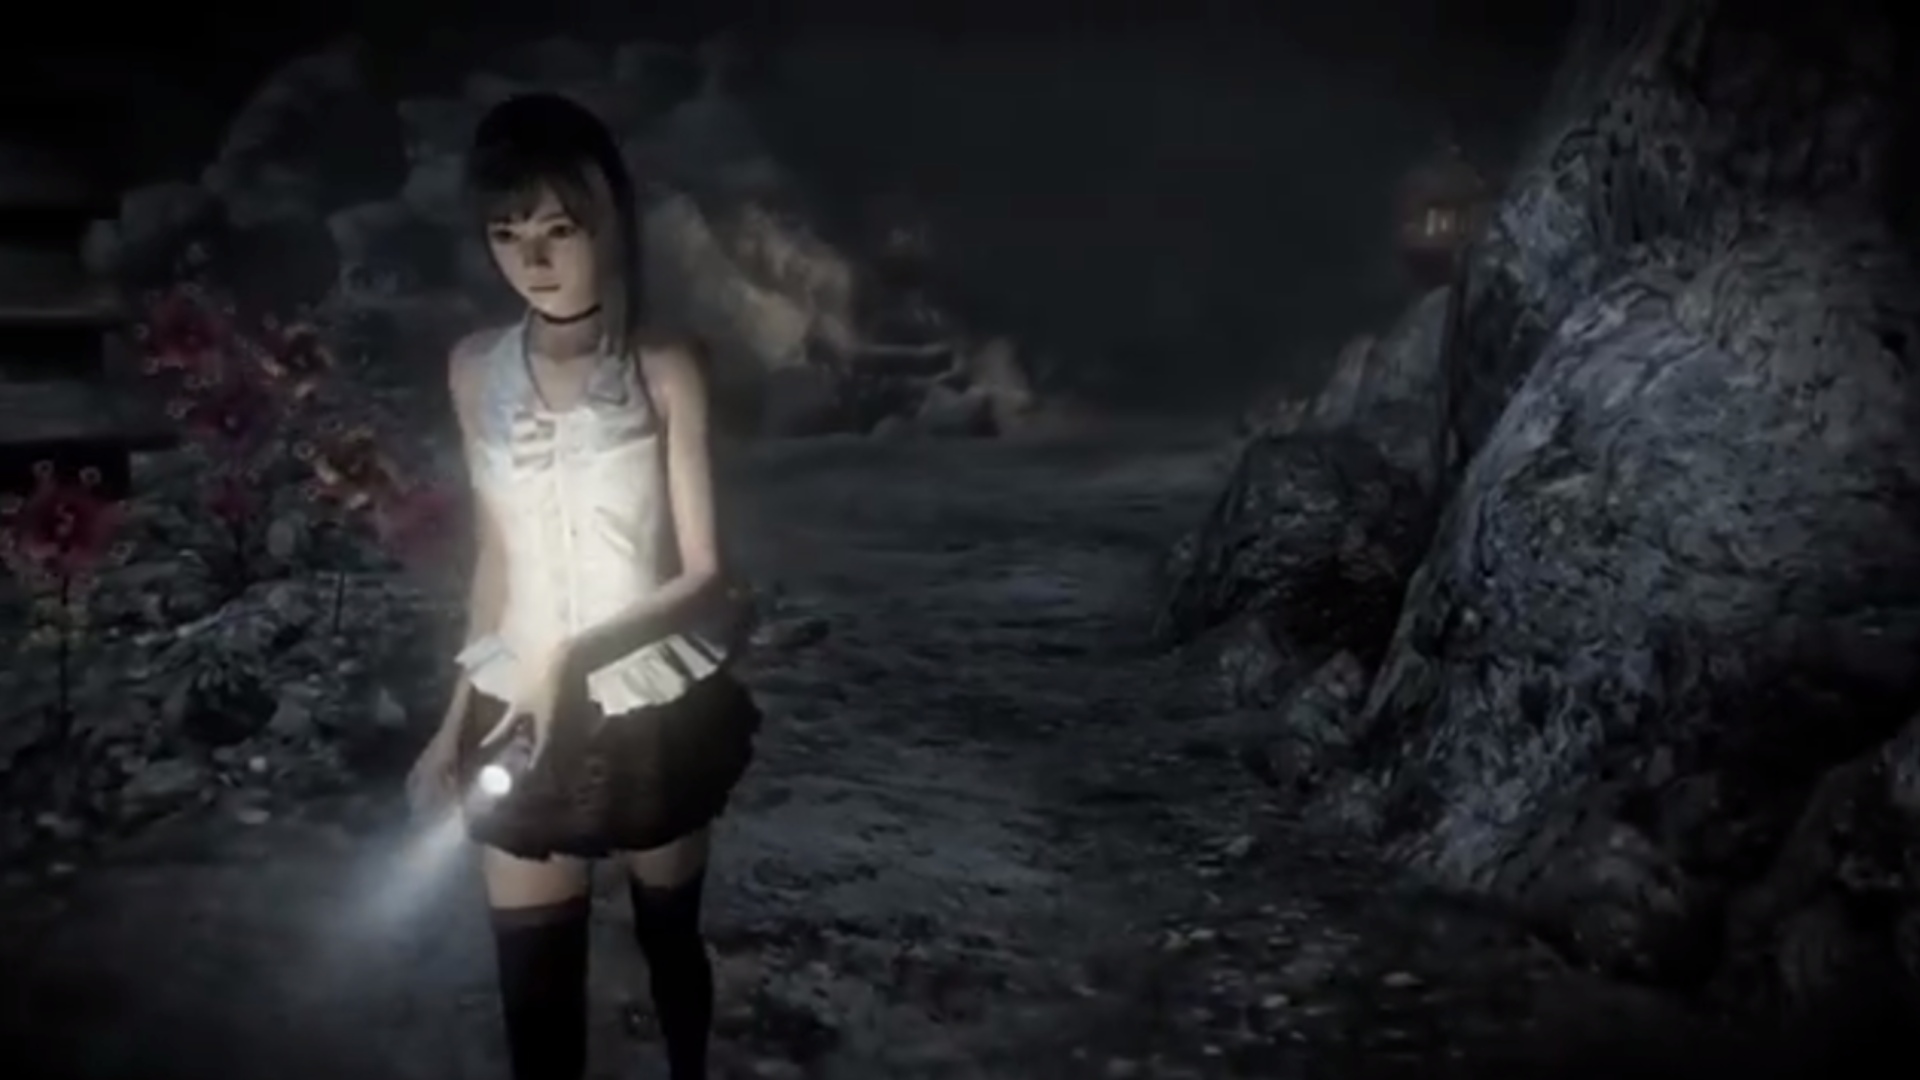 Nintendo Direct April Fools' Screenshot showing a new fatal frame game screenshot with a japanese teenage girl aloen in a rural location with a torch